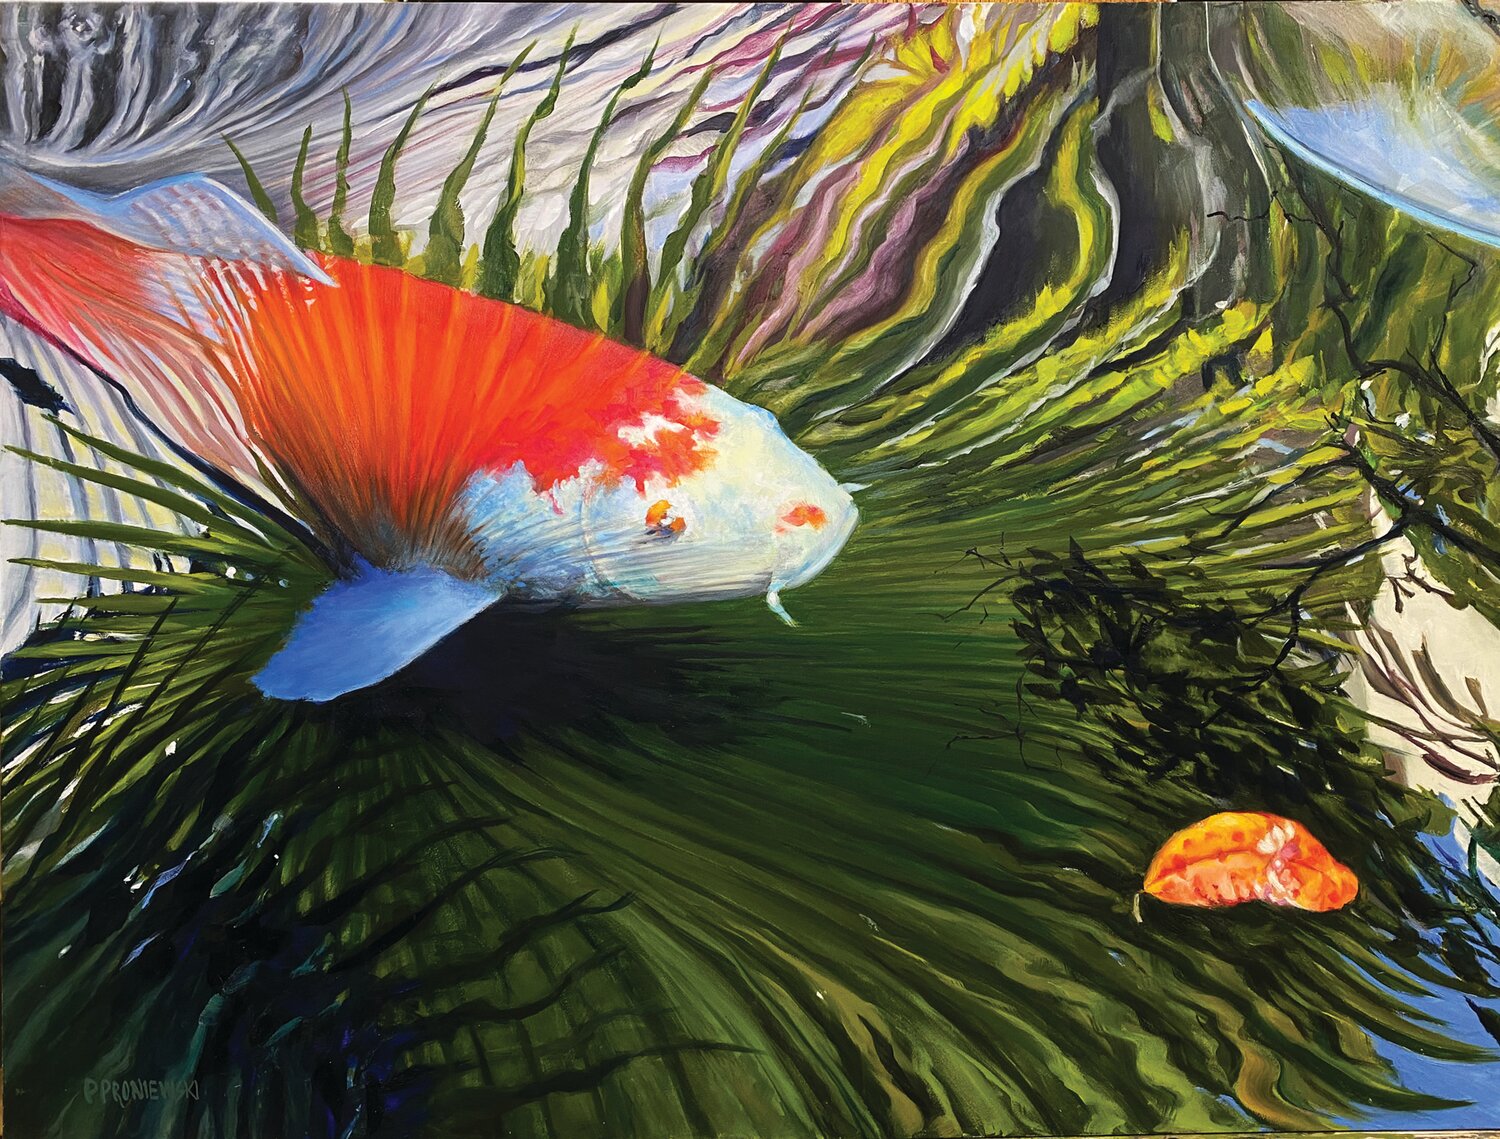 In Pat Proniewski’s “Fishy,” the light of the sky is reflected in the water and shadow allows us to see through the water to the submerged koi and underwater plants.